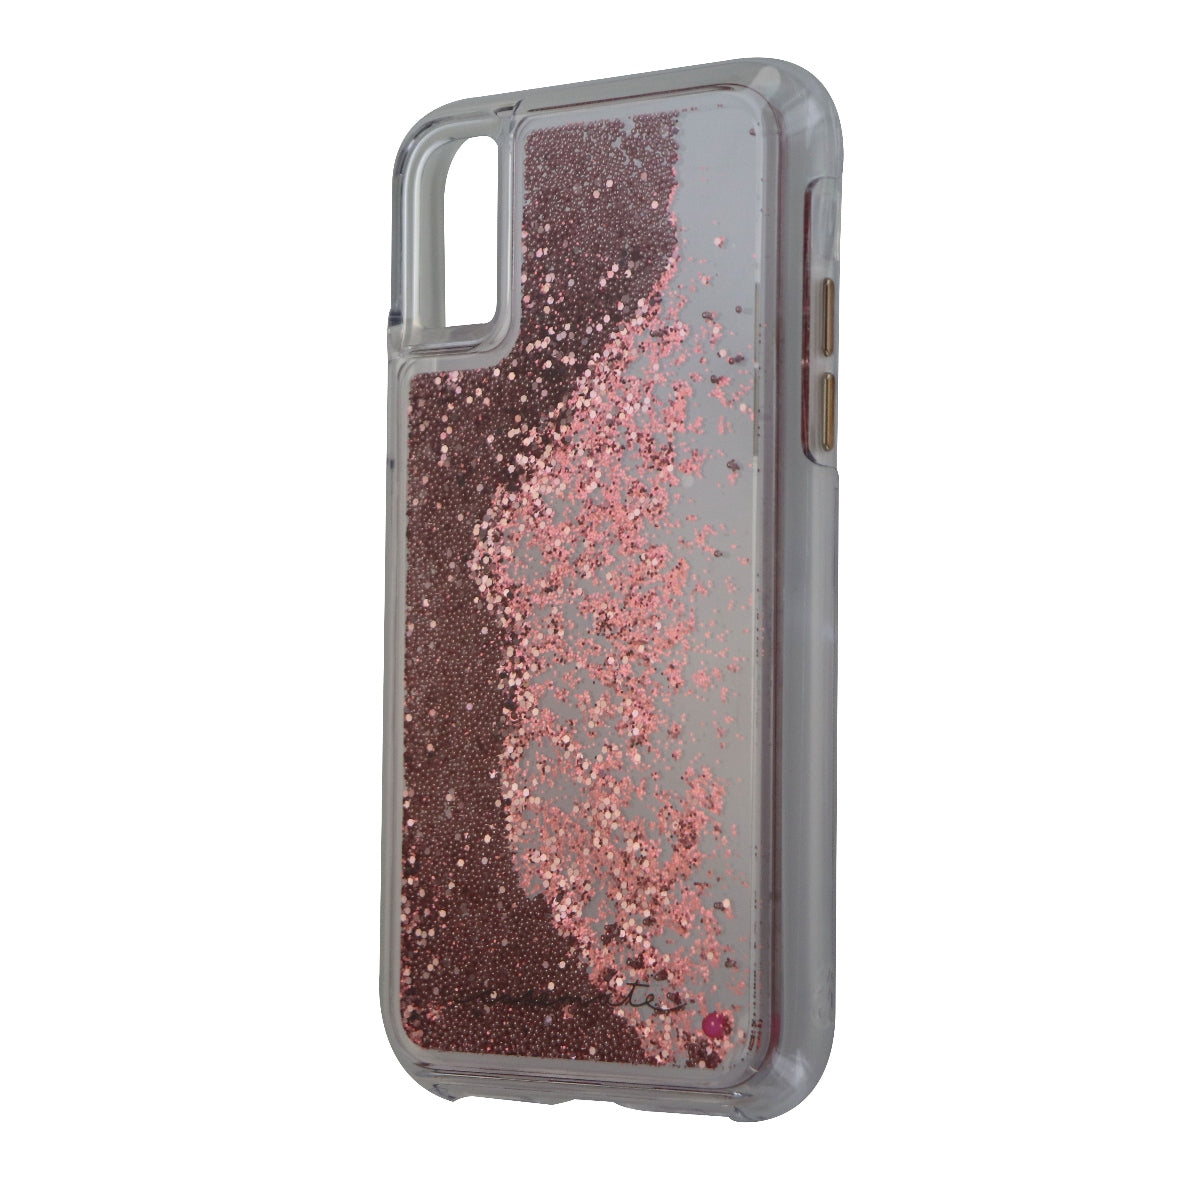 Case-Mate Waterfall Liquid Case for Apple iPhone Xs / X - Clear/Pink Glitter Cell Phone - Cases, Covers & Skins Case-Mate    - Simple Cell Bulk Wholesale Pricing - USA Seller